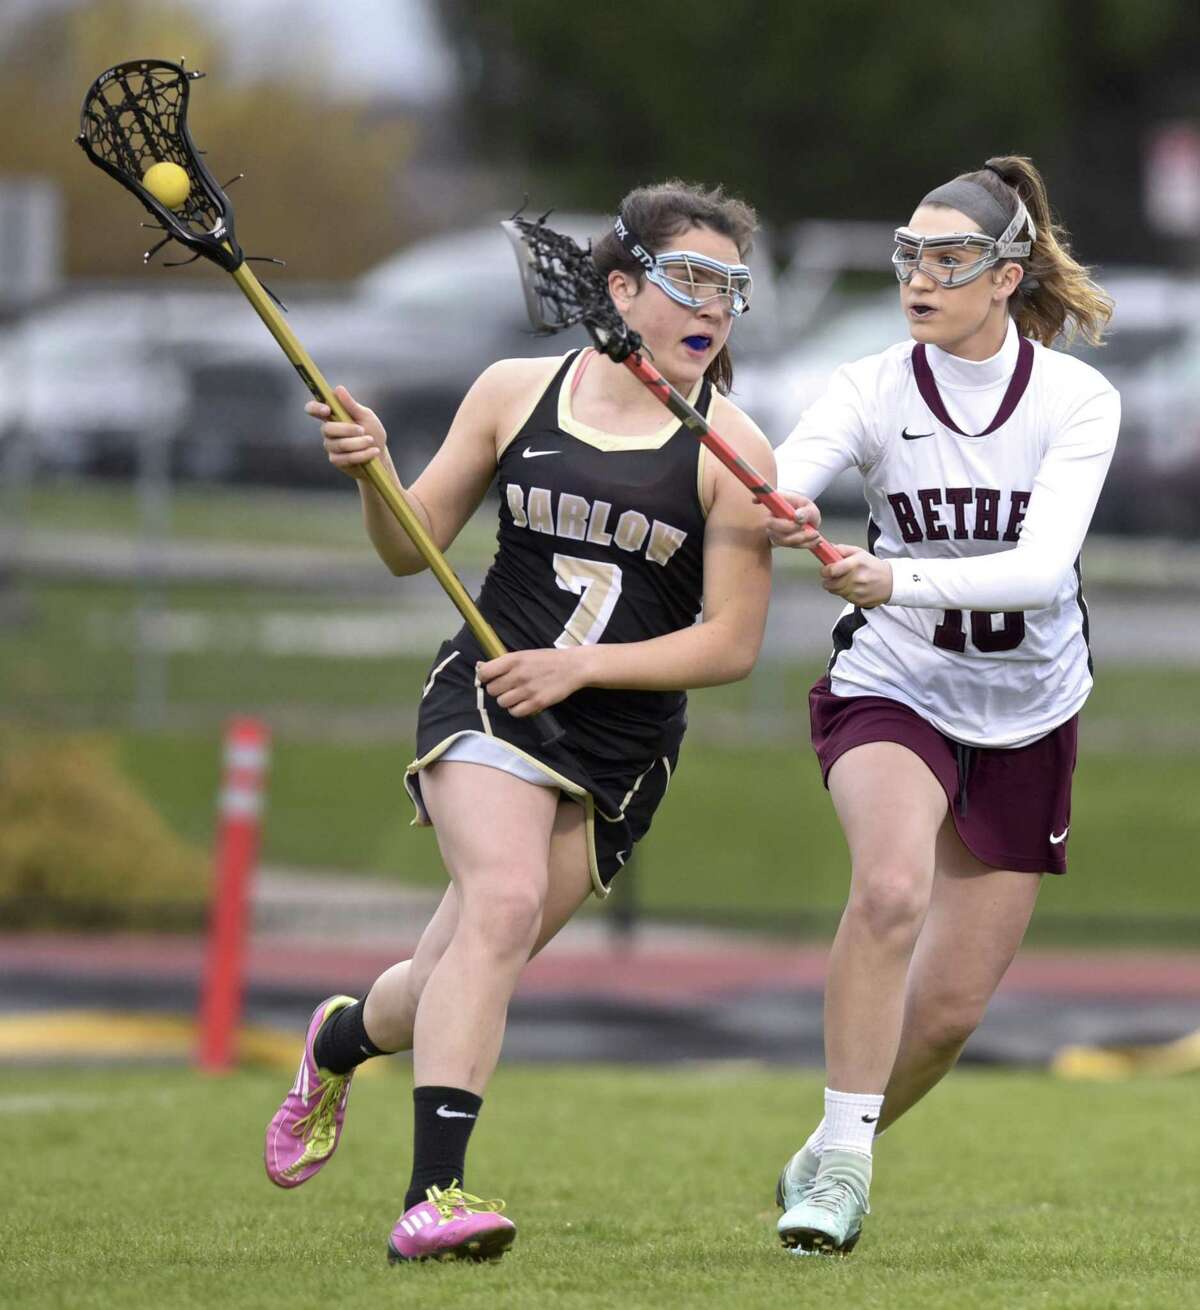 Barlow’s Emily Grob (7) moves behind the Bethel goal while being defended by Bethel’s Anna Riolo during their game Tuesday afternoon at Bethel High School.